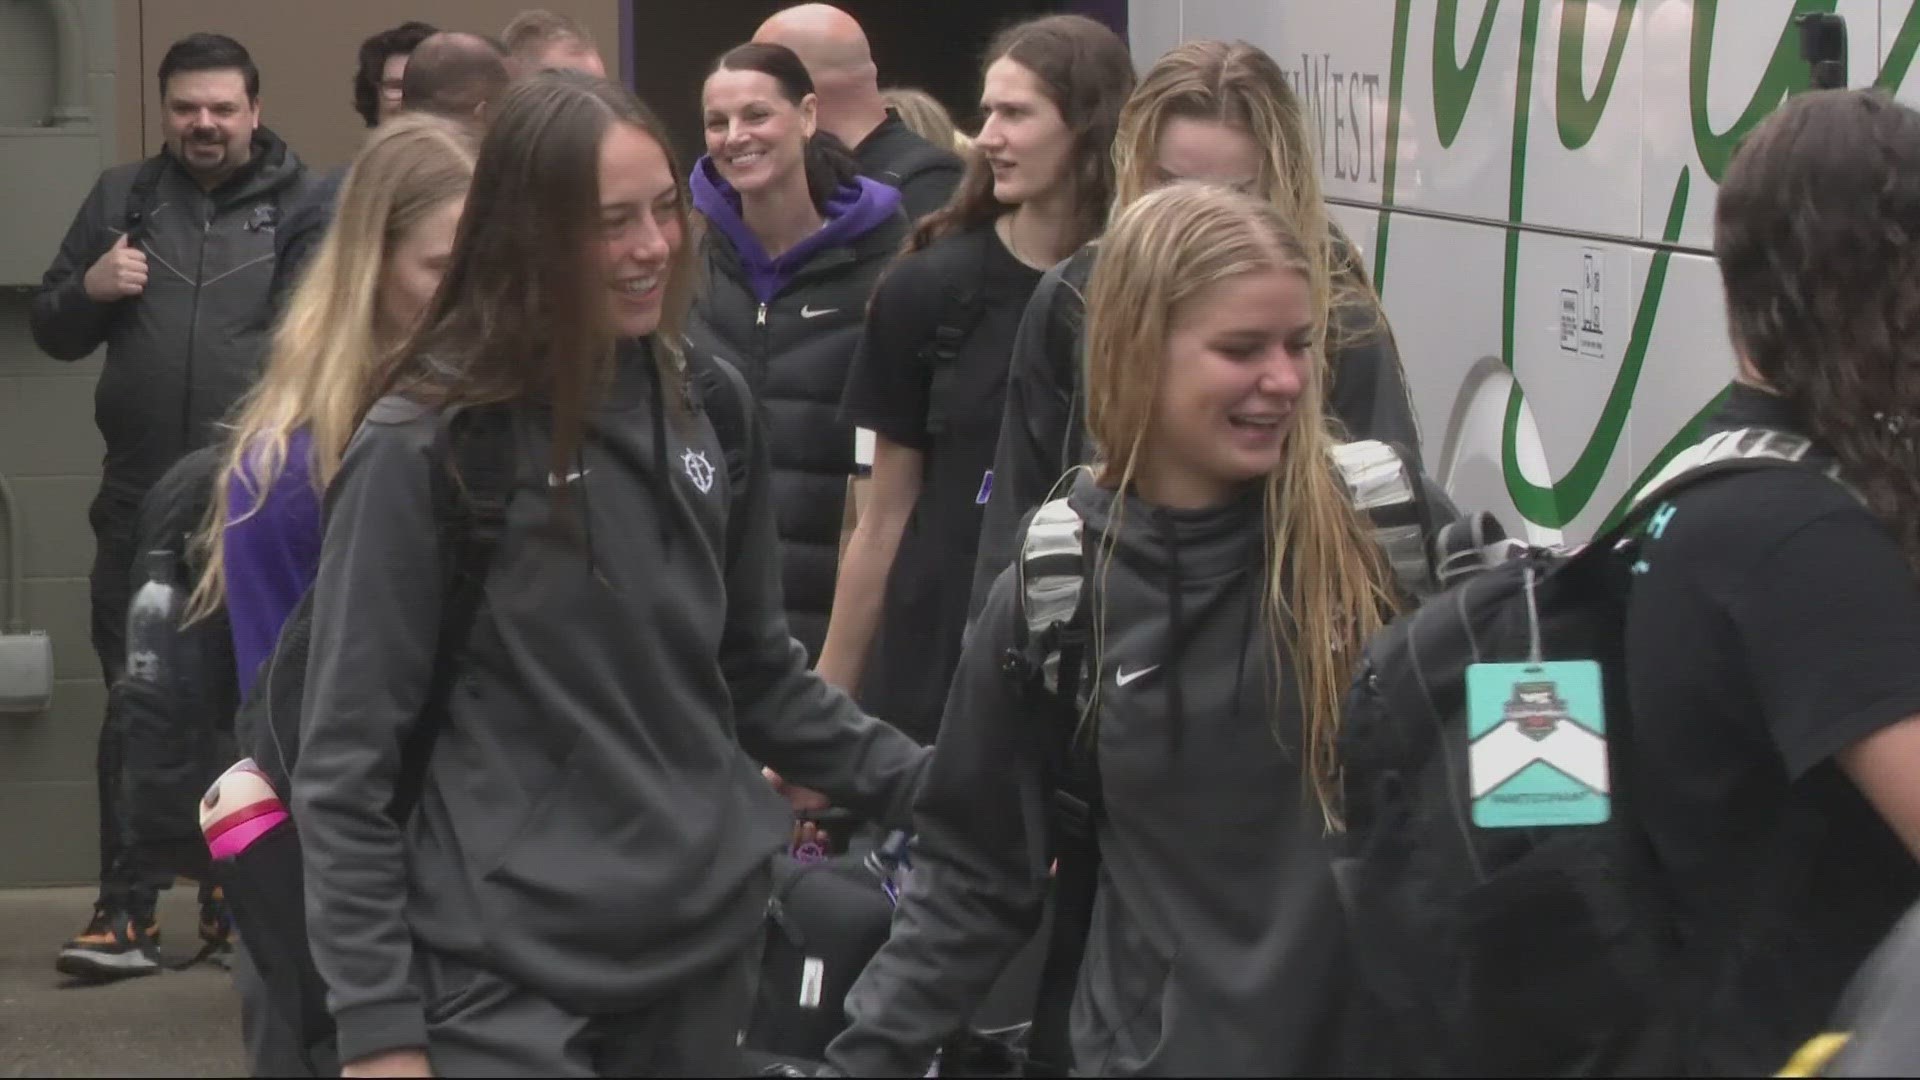 The University of Portland's women's basketball team are headed to the NCAA Tournament for the second year in a row.